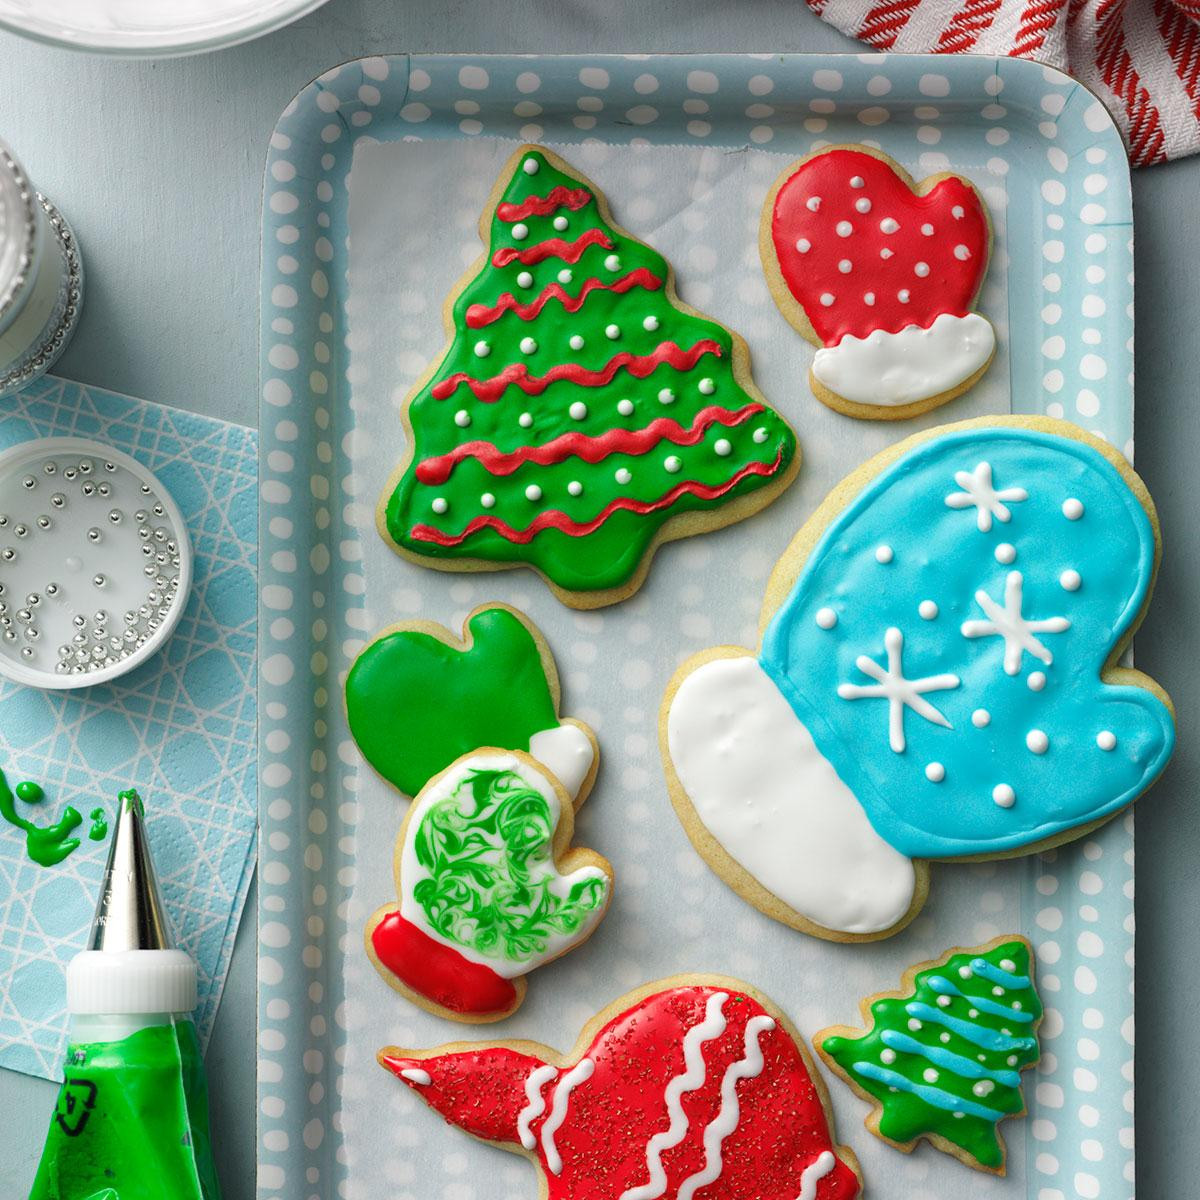 Image Of Christmas Cookies
 Holiday Cutout Cookies Recipe